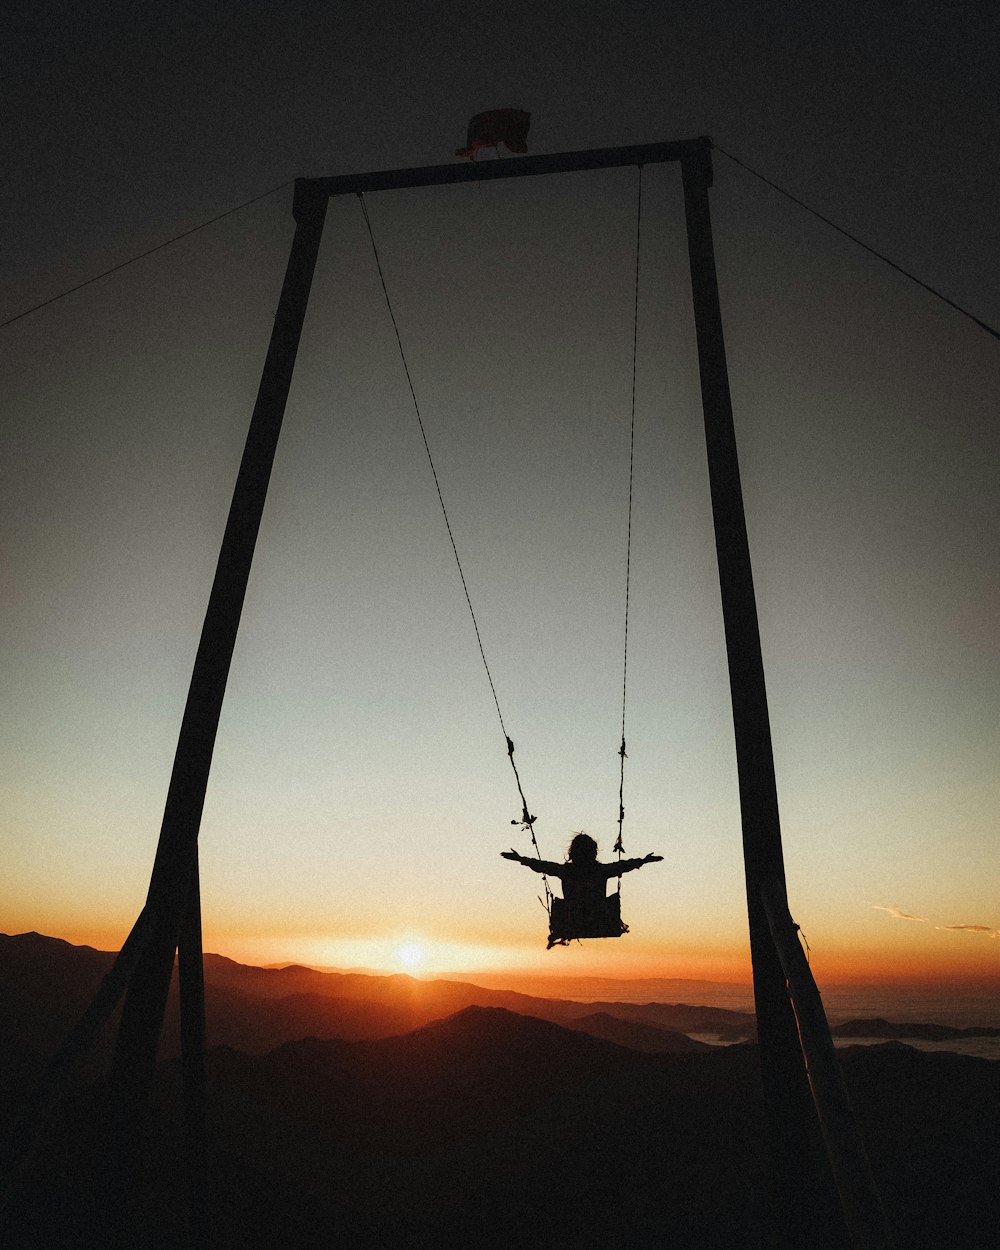 silhouette of person riding on swing during sunset